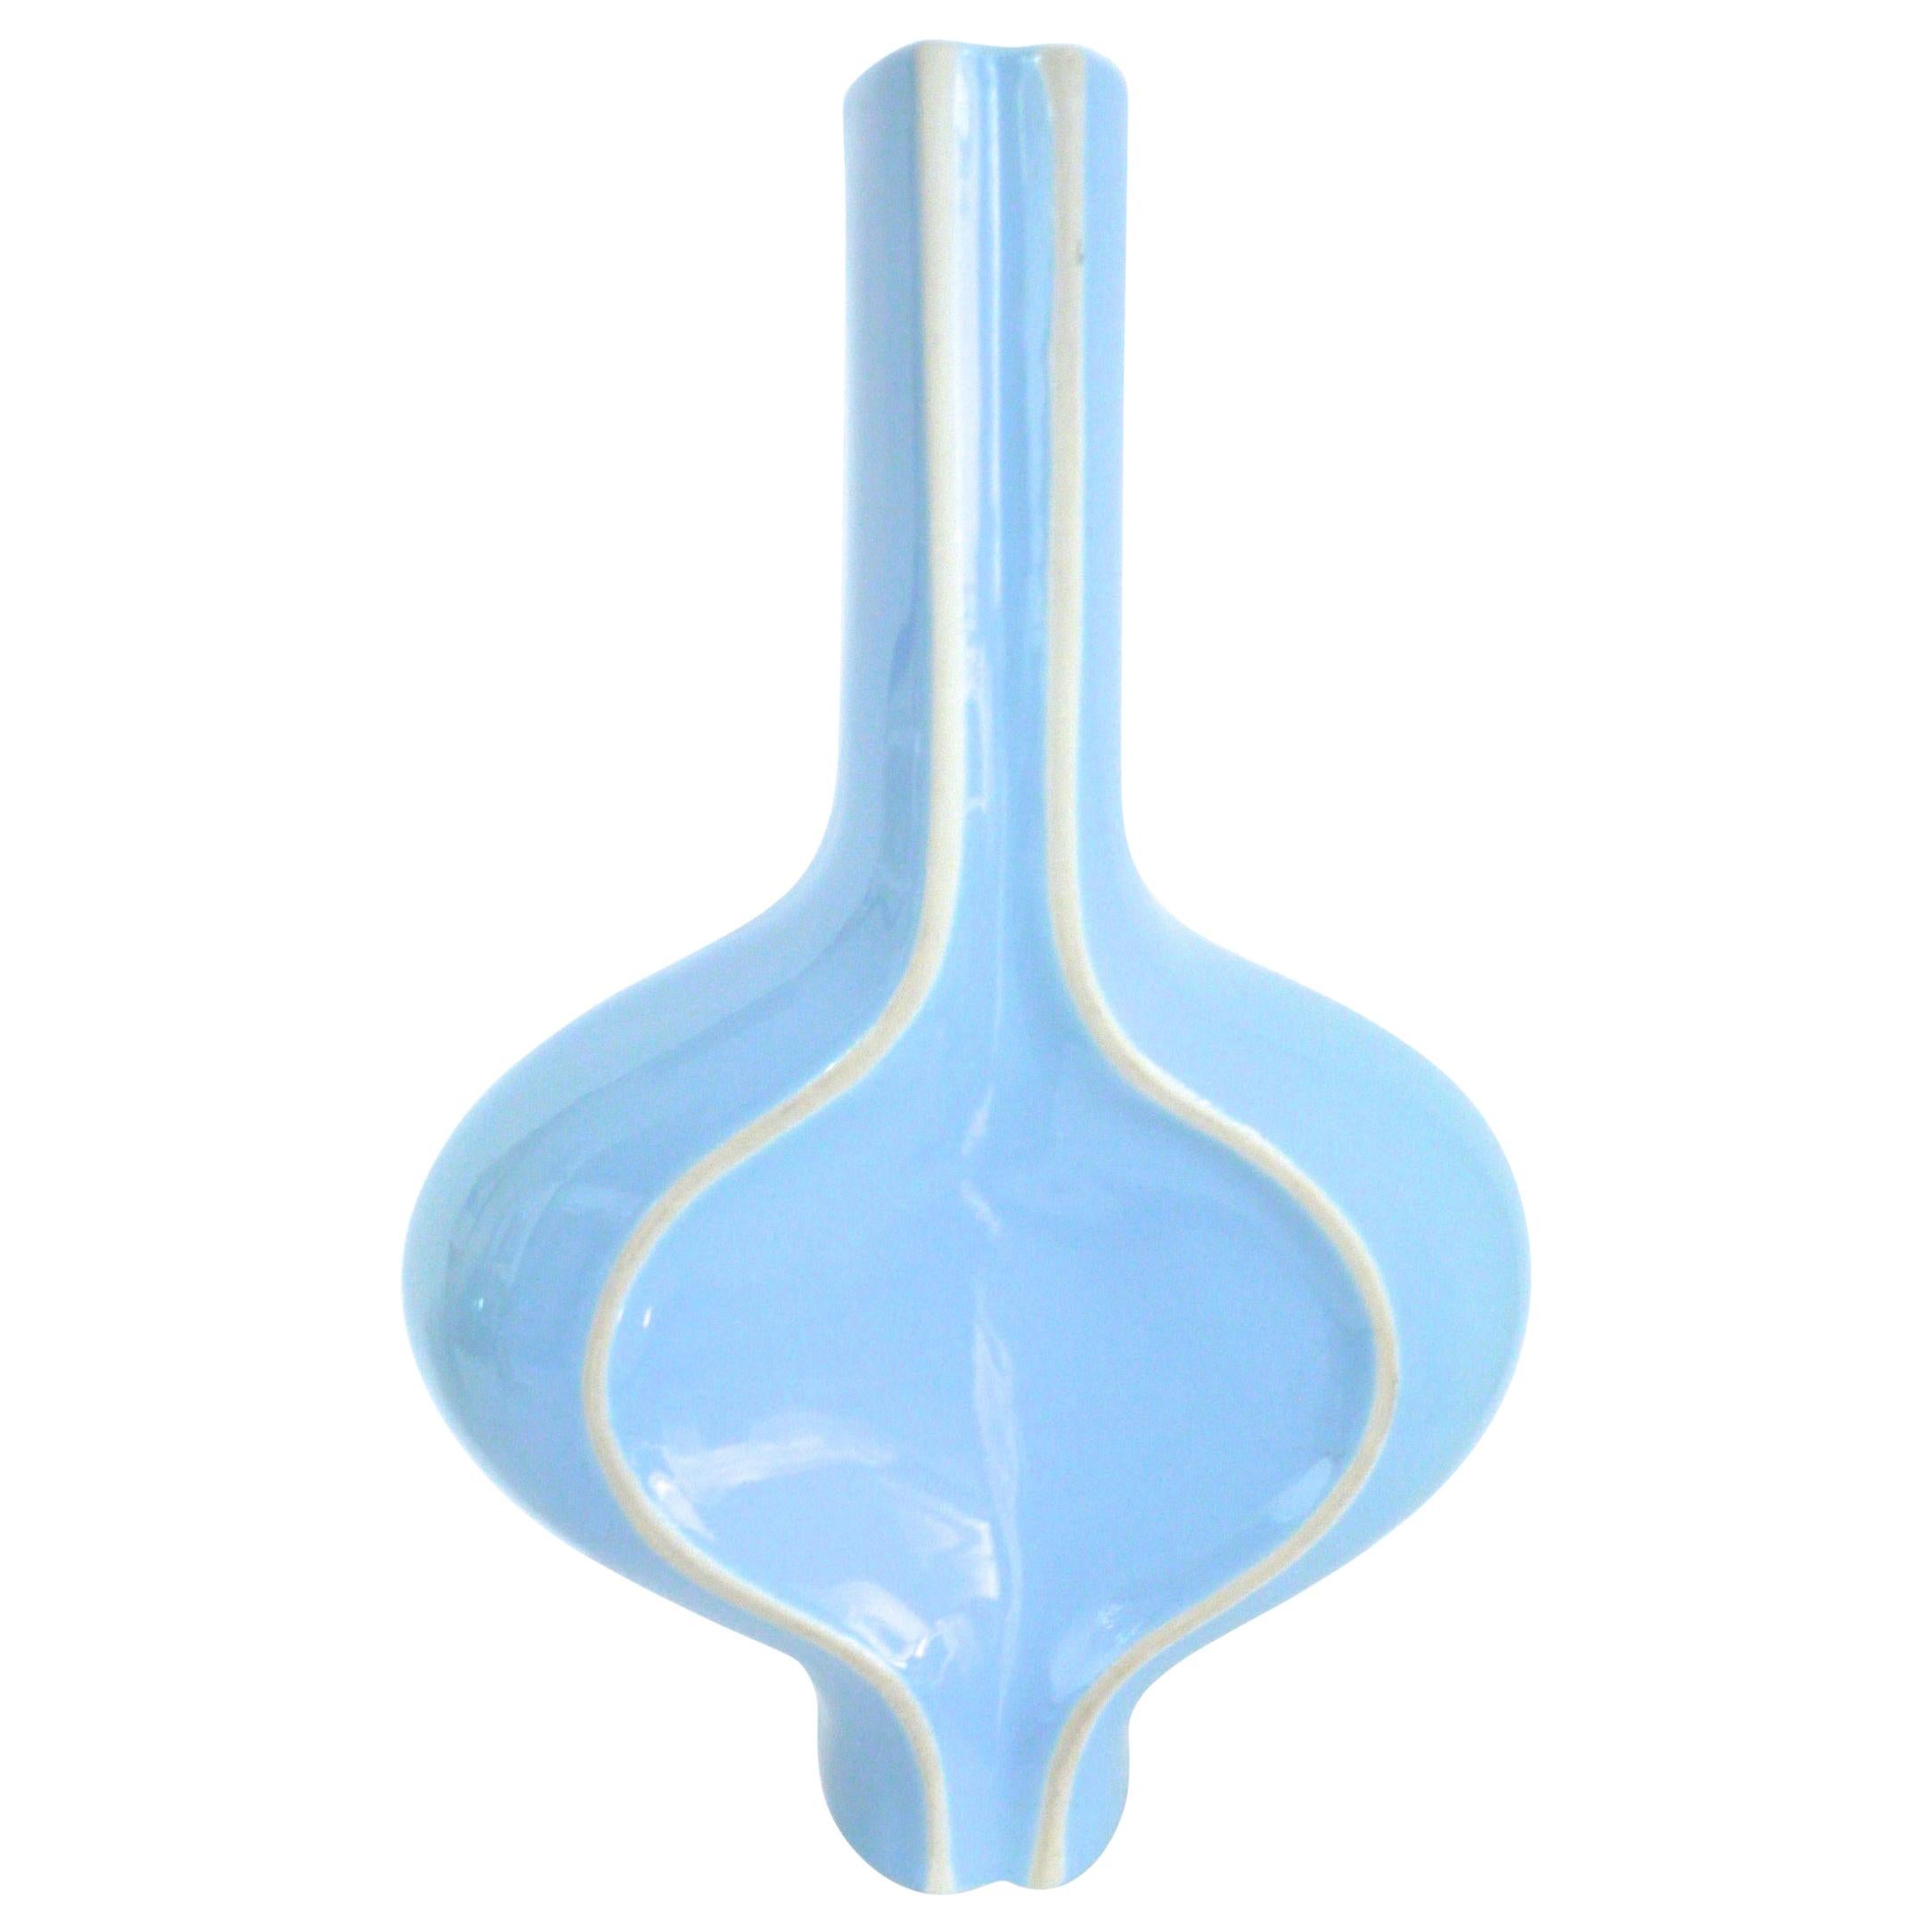 Sought after, Space Age China Swallow Vase by Scabetti Dominic Bromley, 2002 UK For Sale